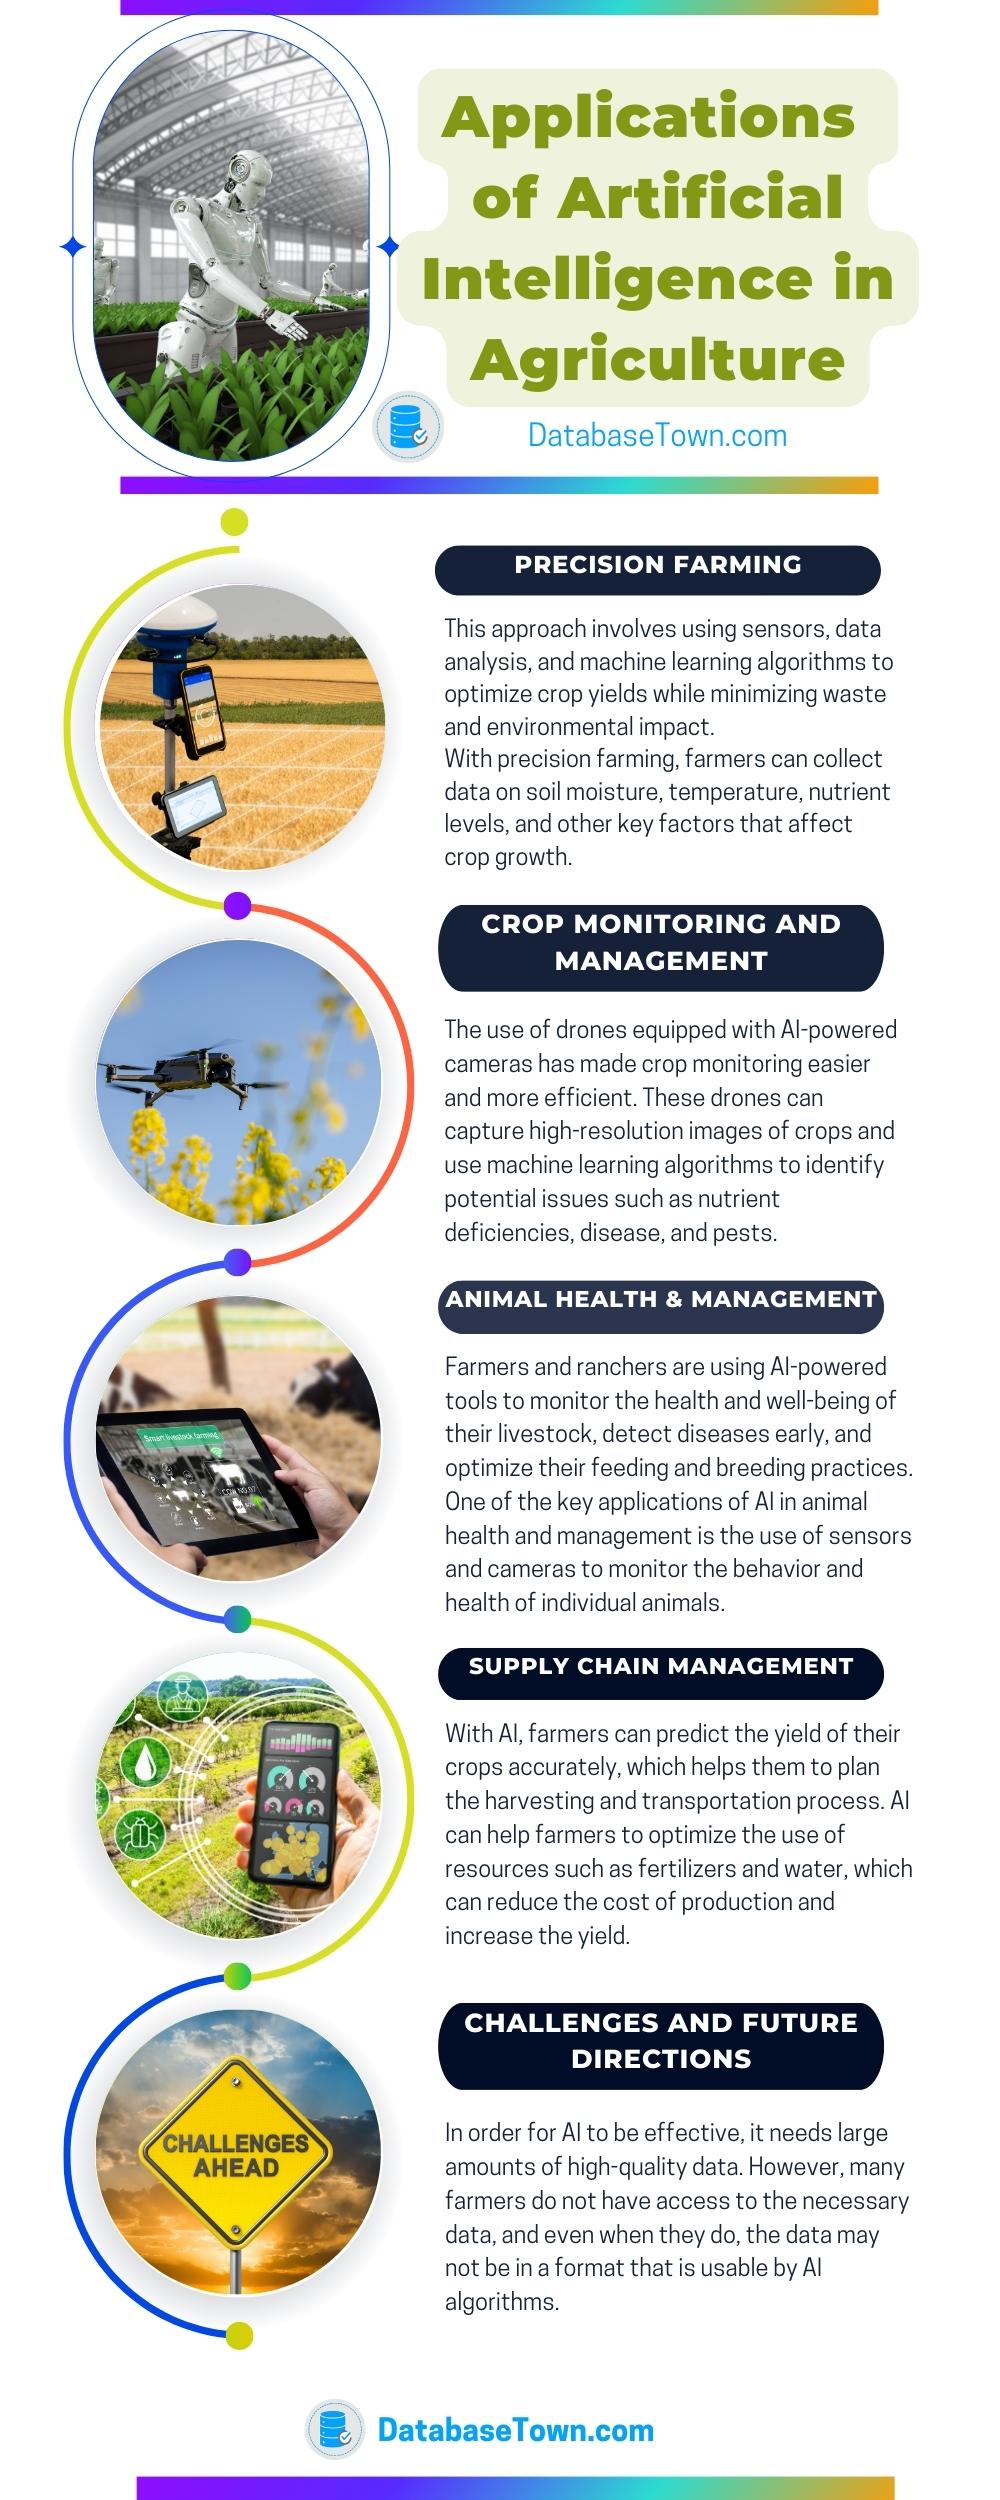 Applications of Artificial Intelligence in Agriculture